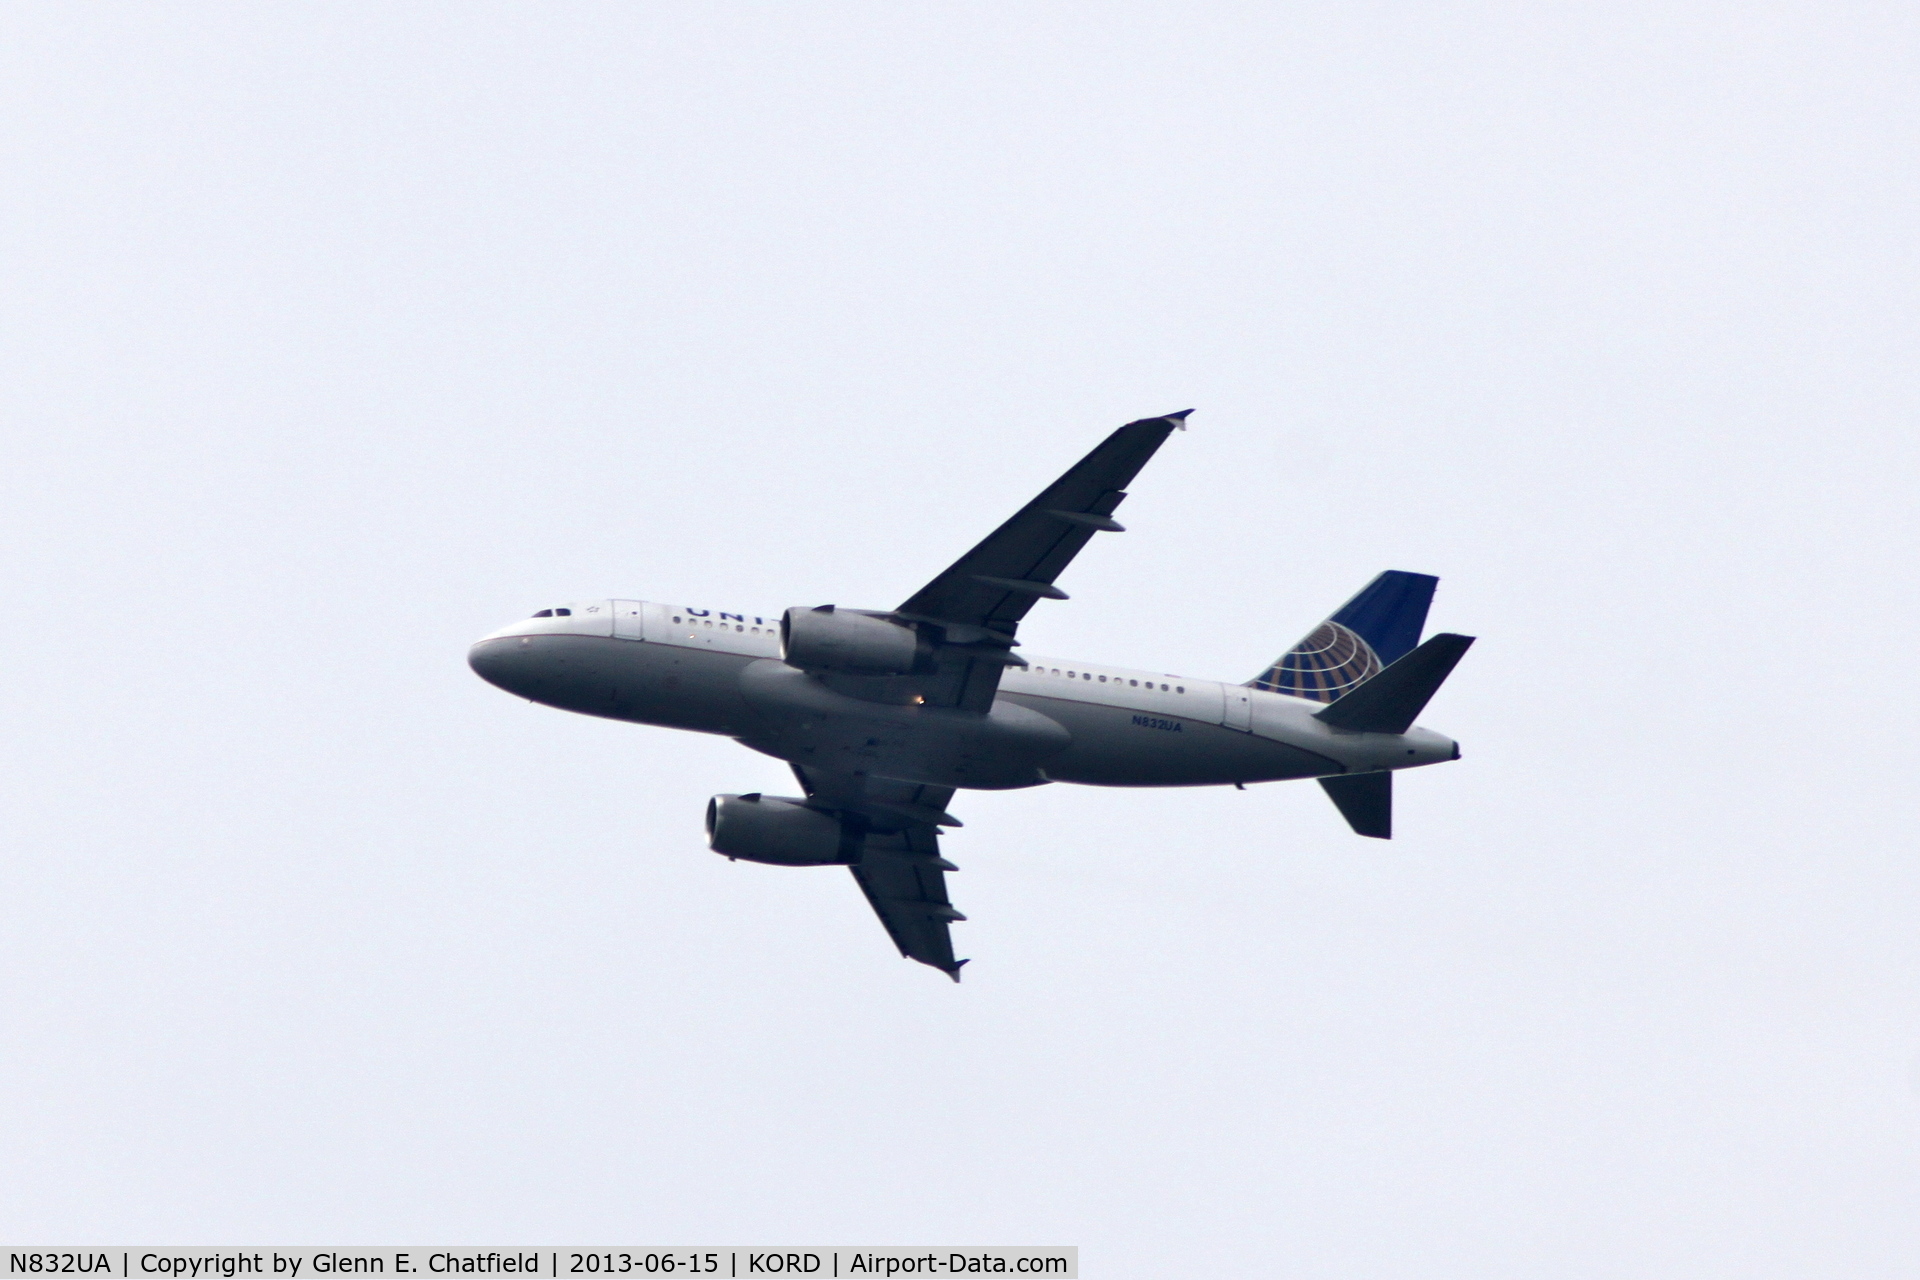 N832UA, 2000 Airbus A319-131 C/N 1321, Over Itasca after departing O'Hare